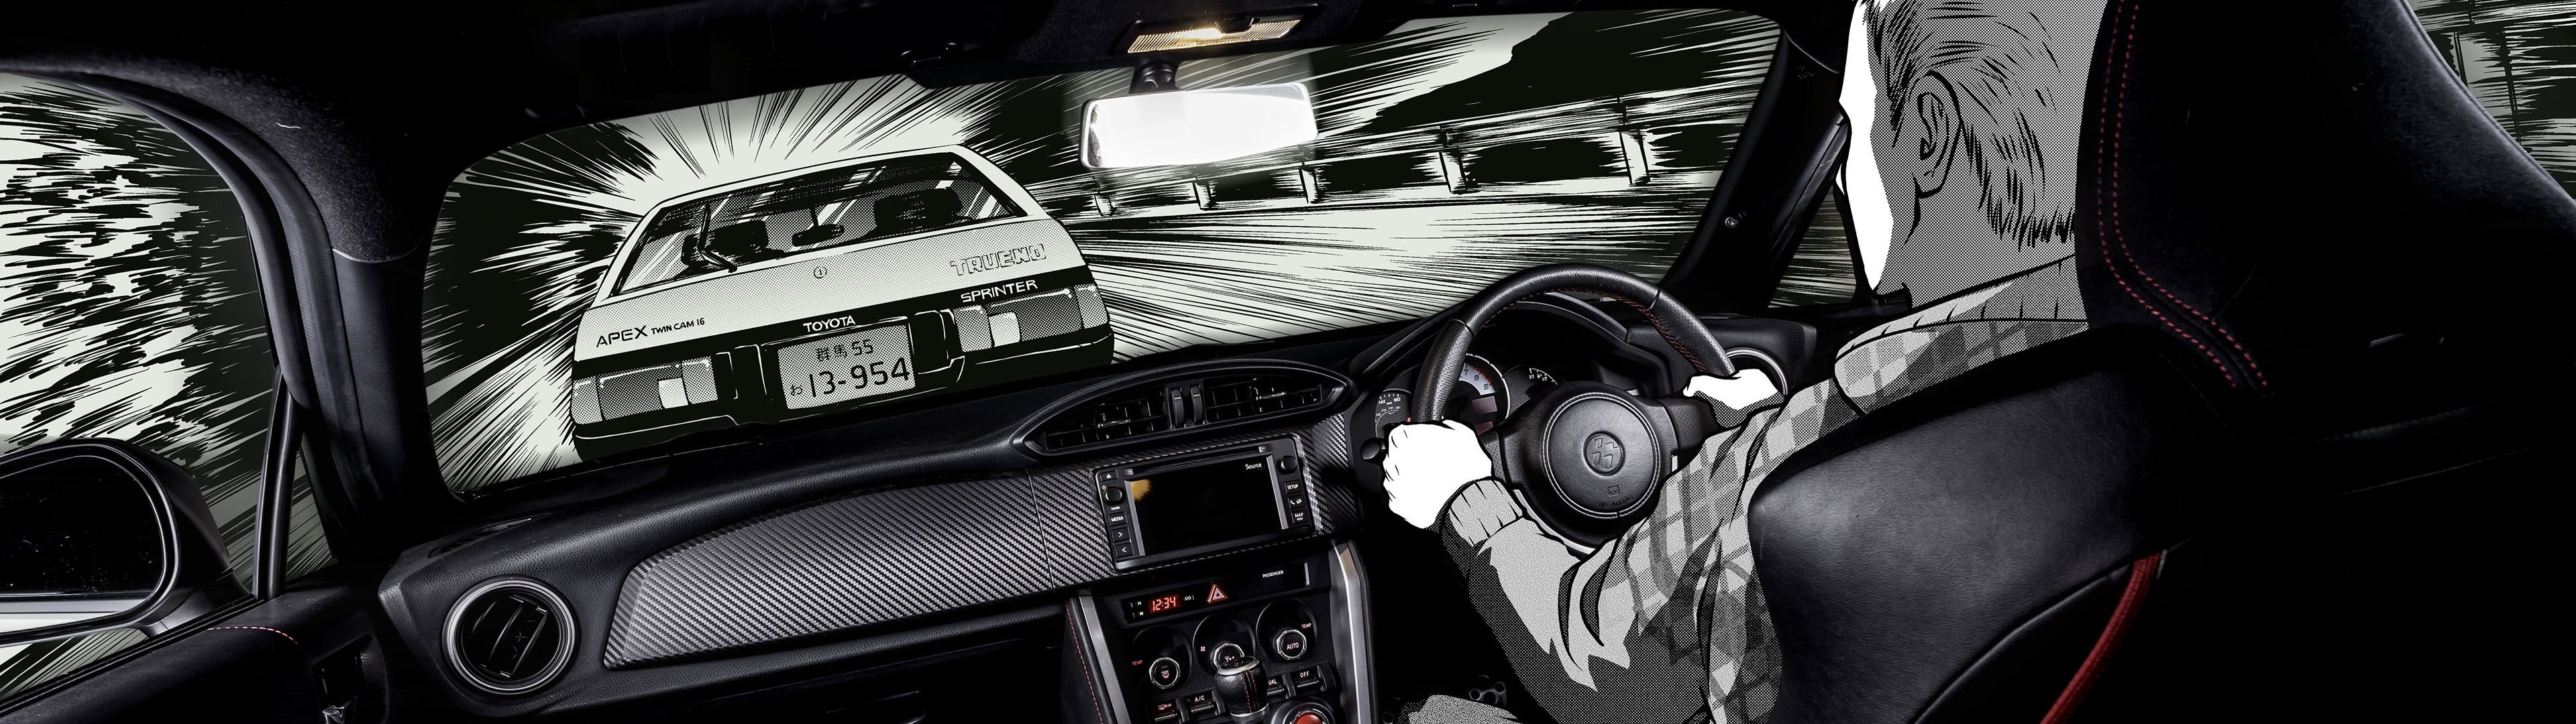 3840x1080 Is this Initial D? ...